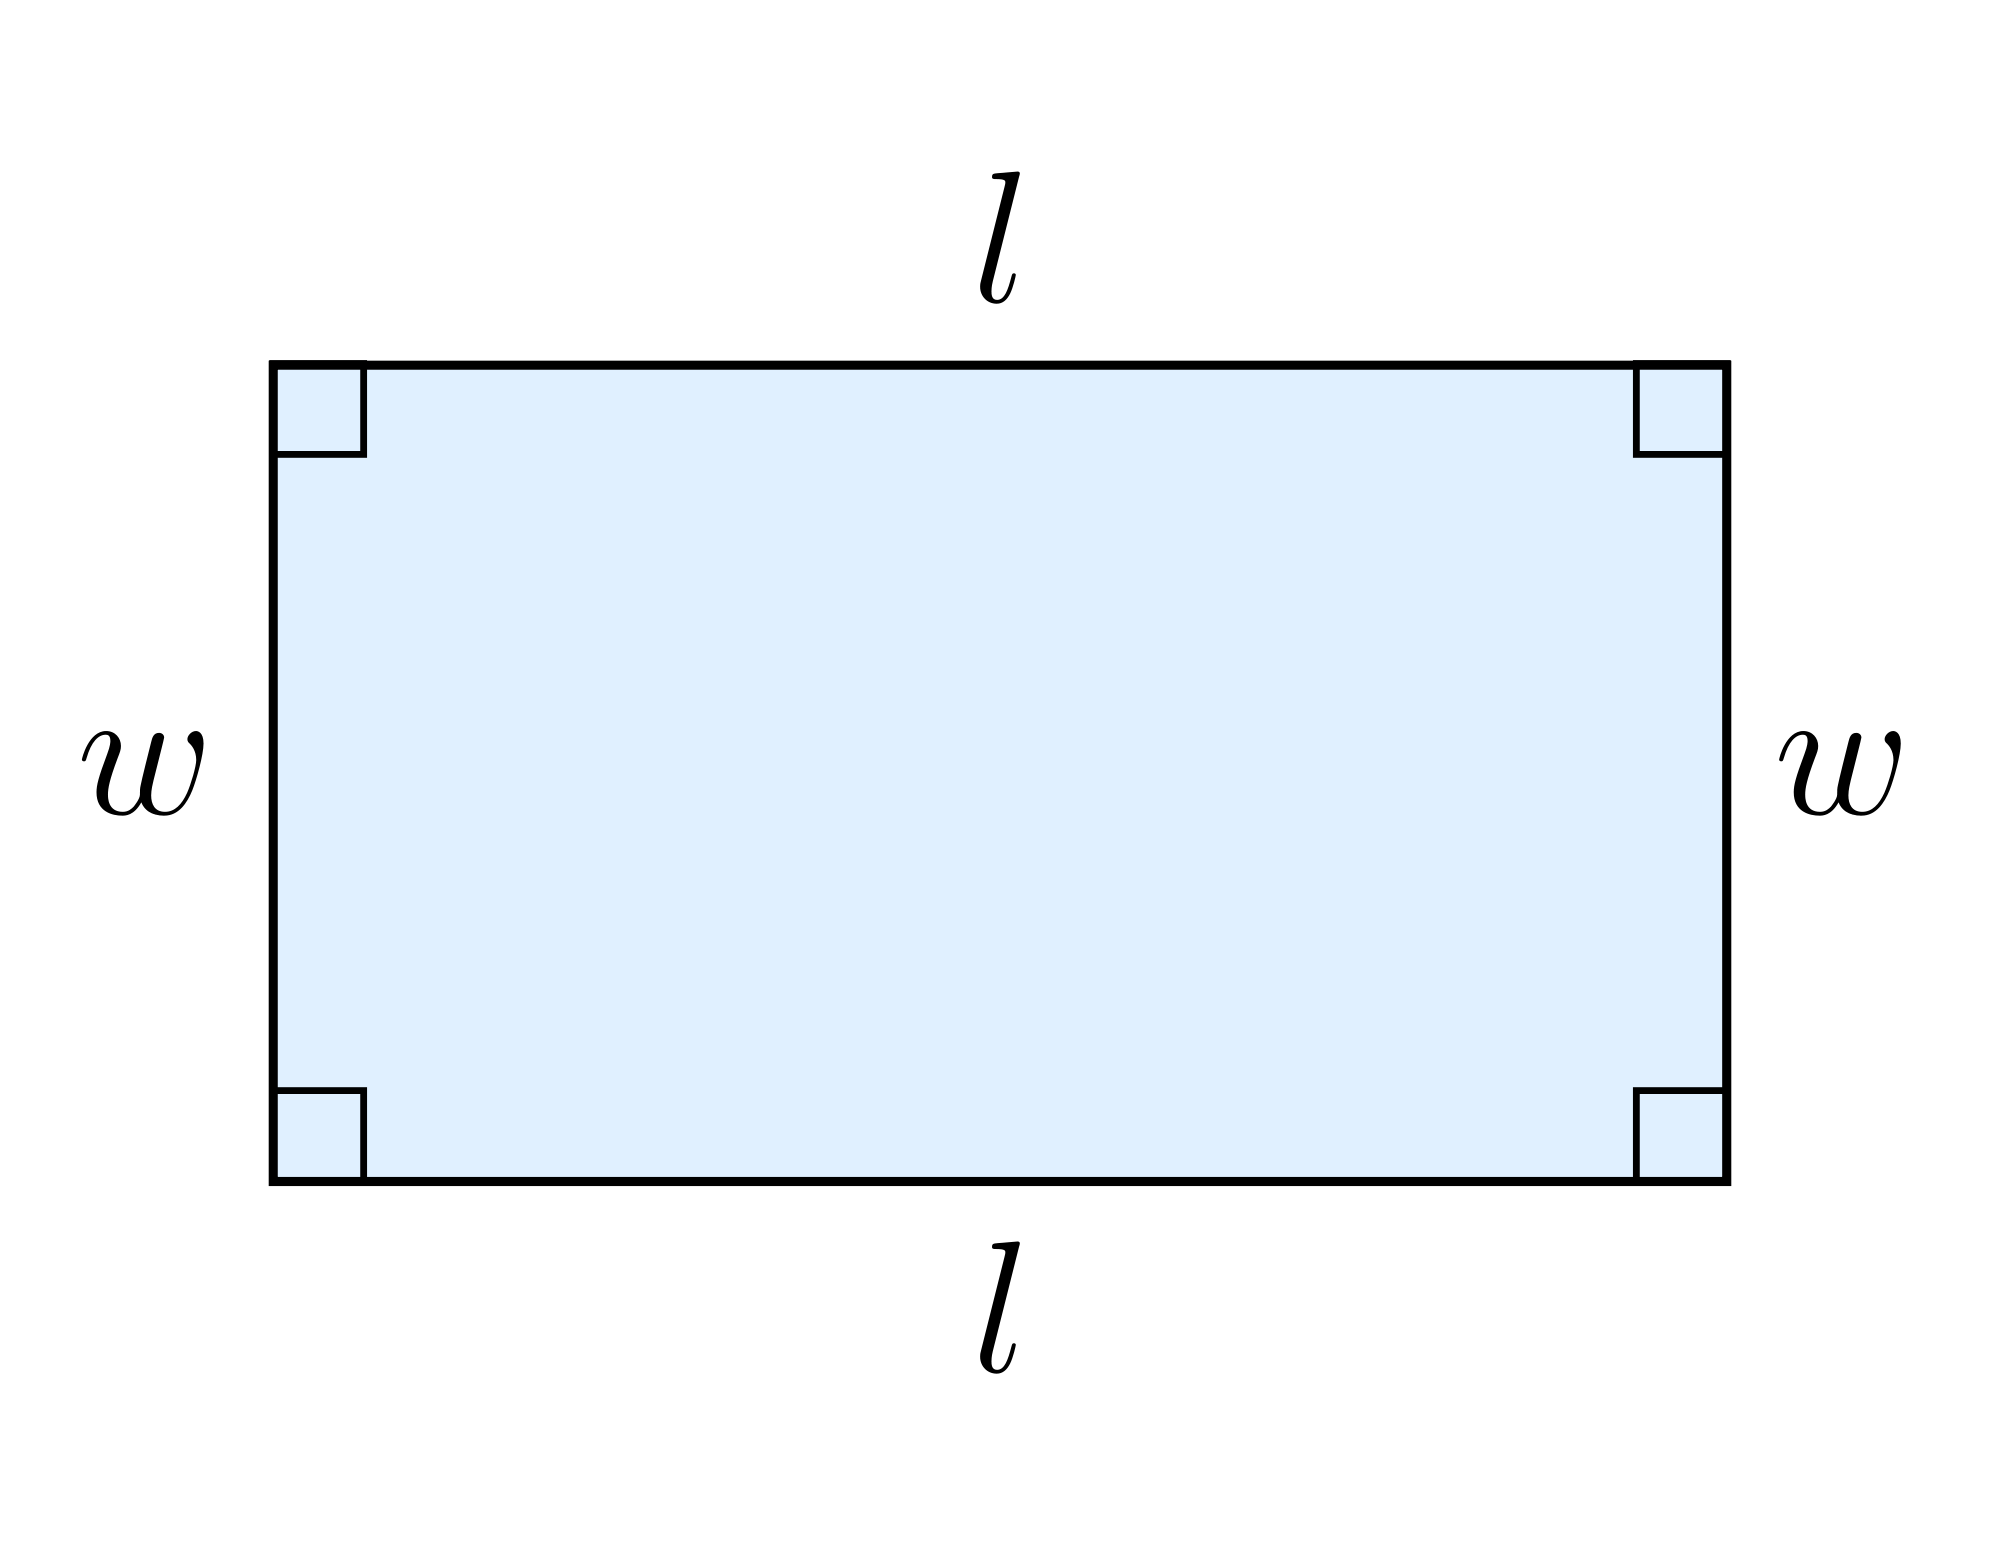 Draw a rectangle that meets both of the following conditions and label